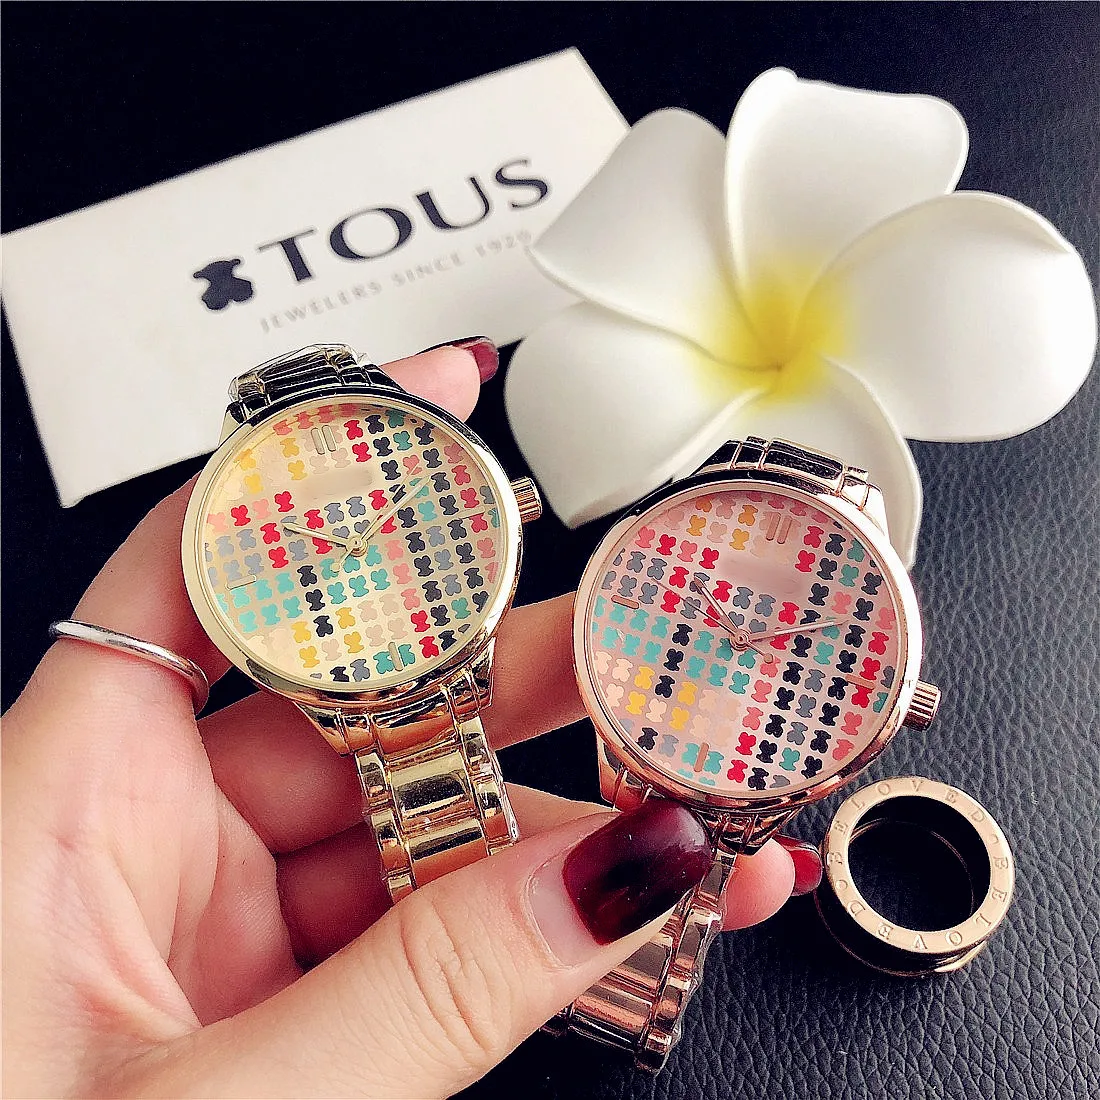 

HOT Mosfet Transistor branded wrist watches for girls wristwatch stand watch with visible mechanism ready to ship